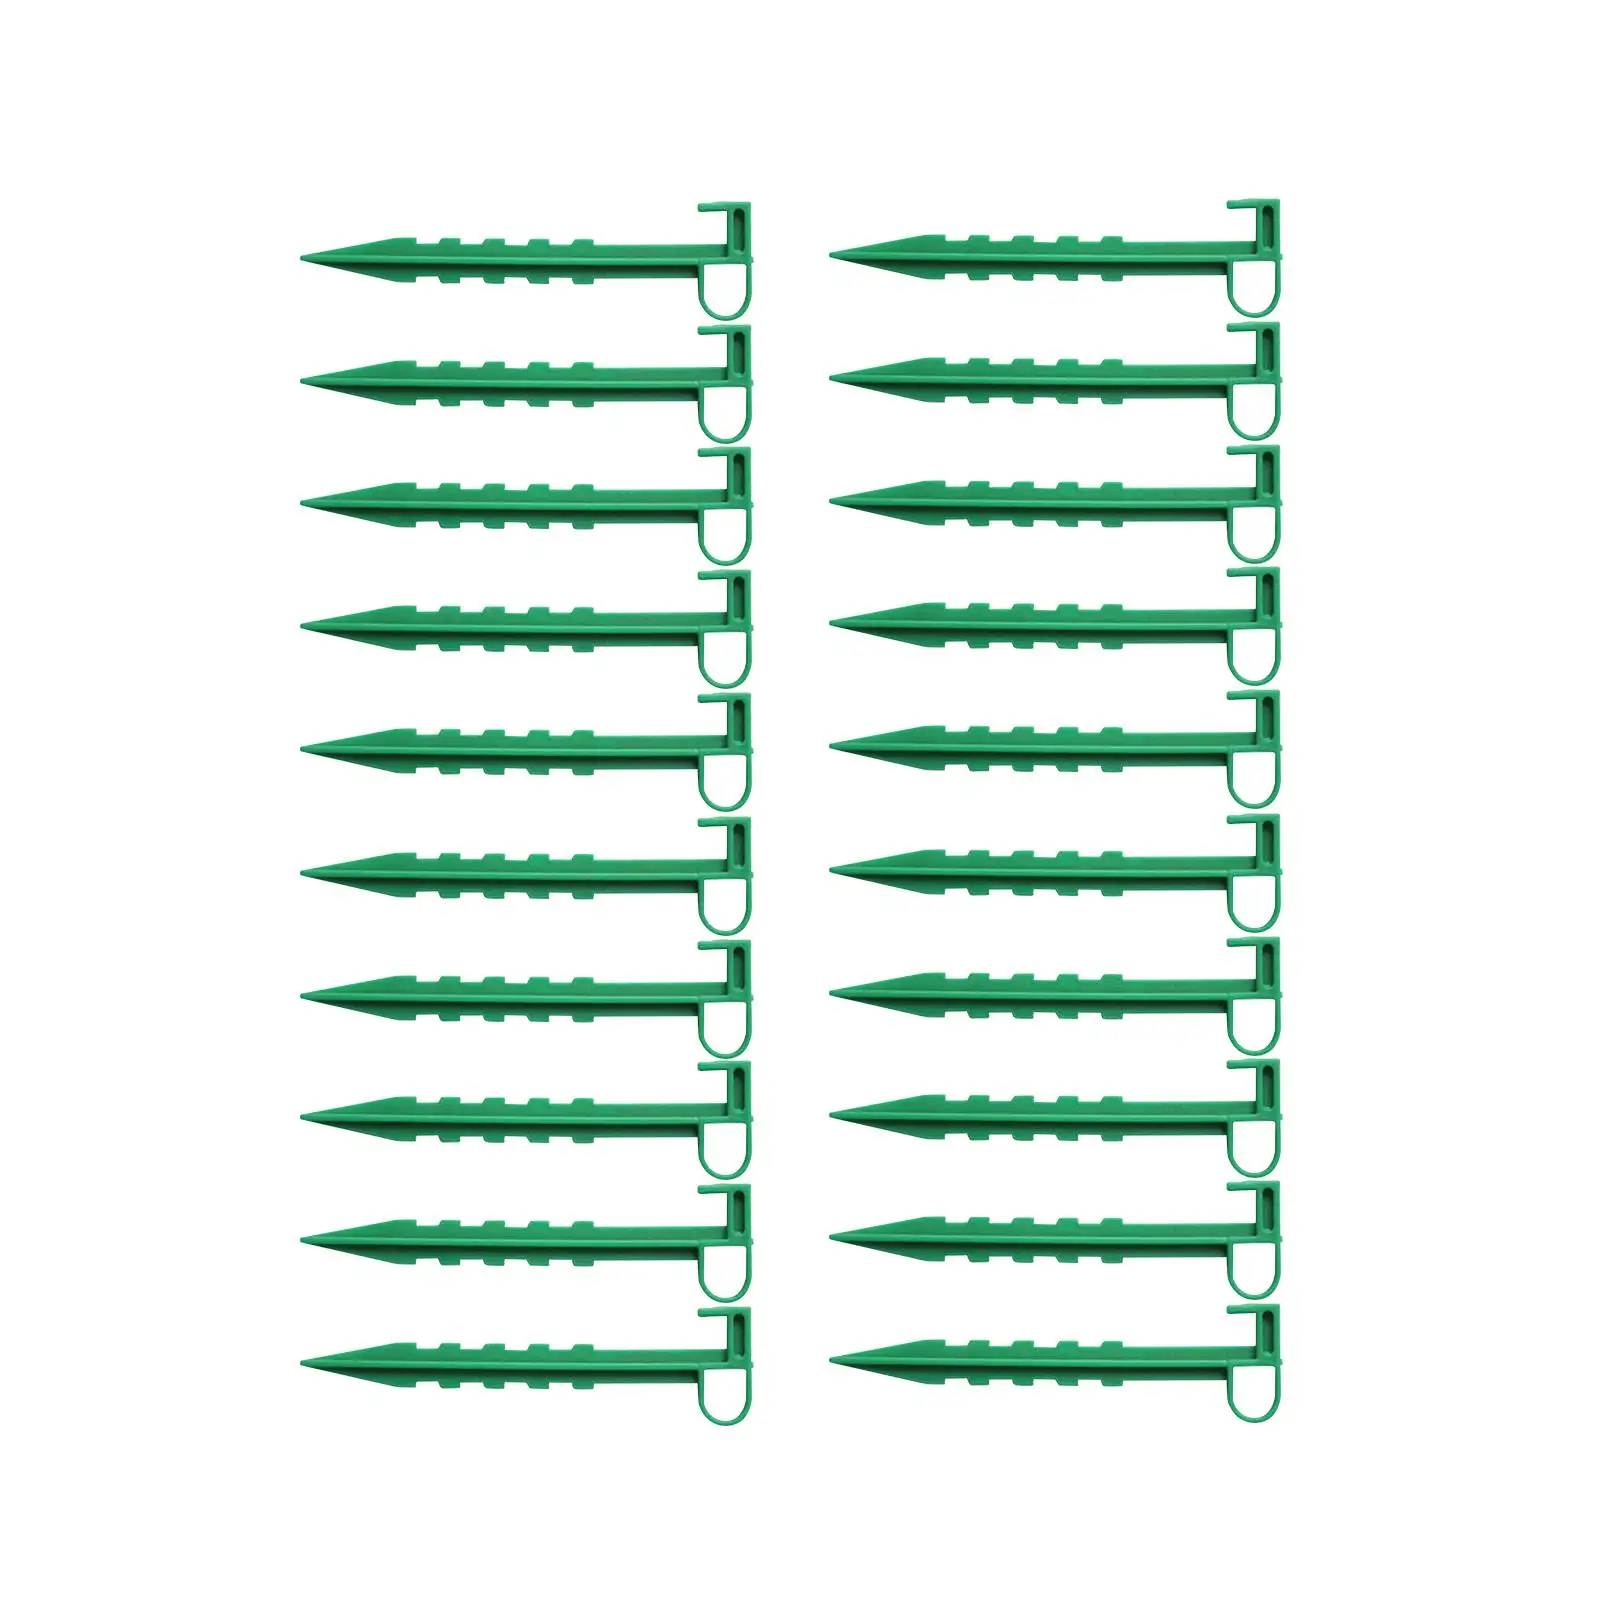 20x Garden Stakes Durable Landscape Nails Anchor Ground Auger Fixation Anchor Pegs for Greenhouse Landscape Fabric Lawn Edging